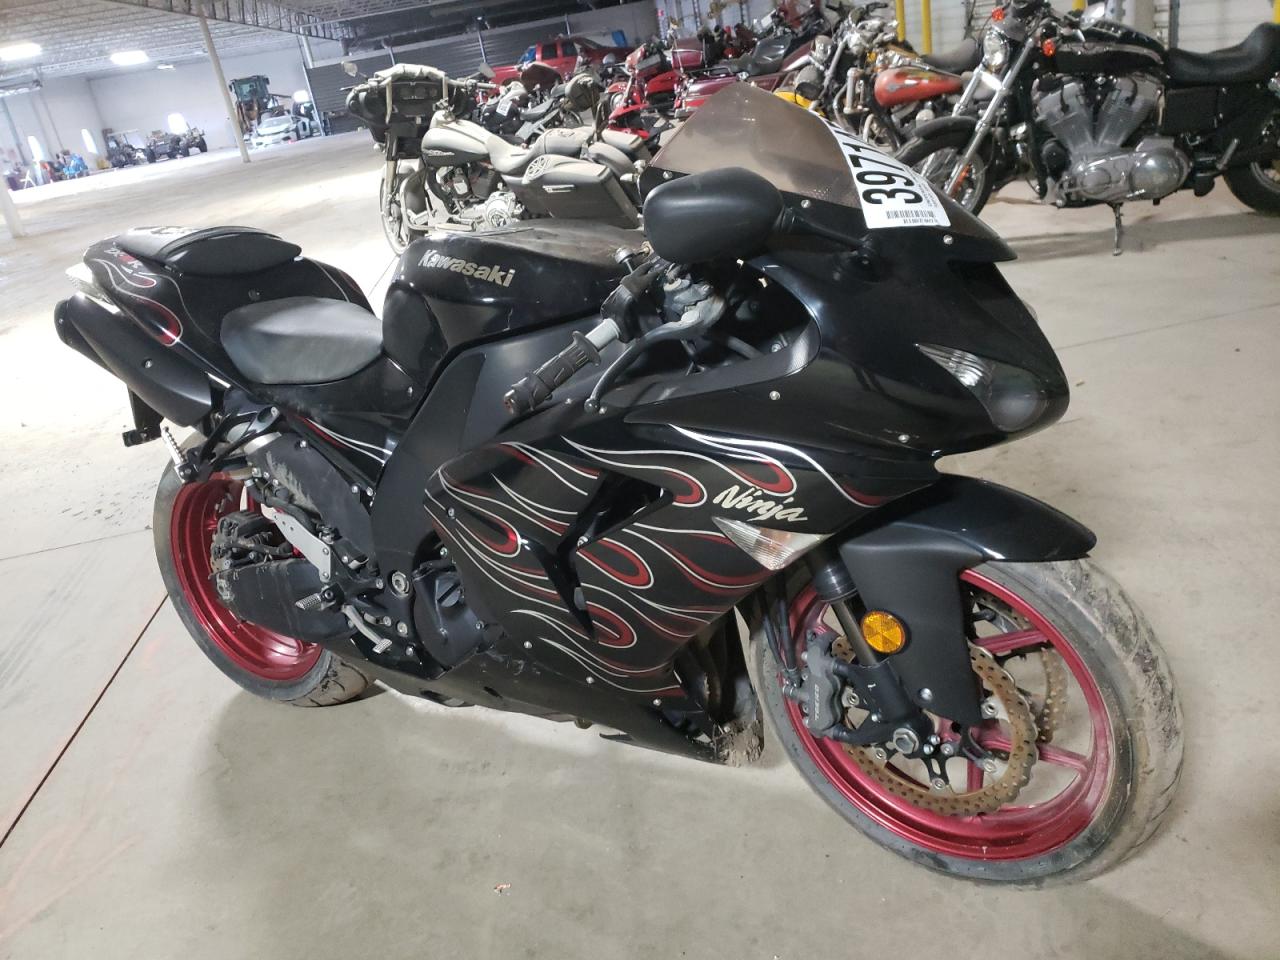 2007 Kawasaki ZX1000 D for sale at Copart Columbus, OH. Lot 